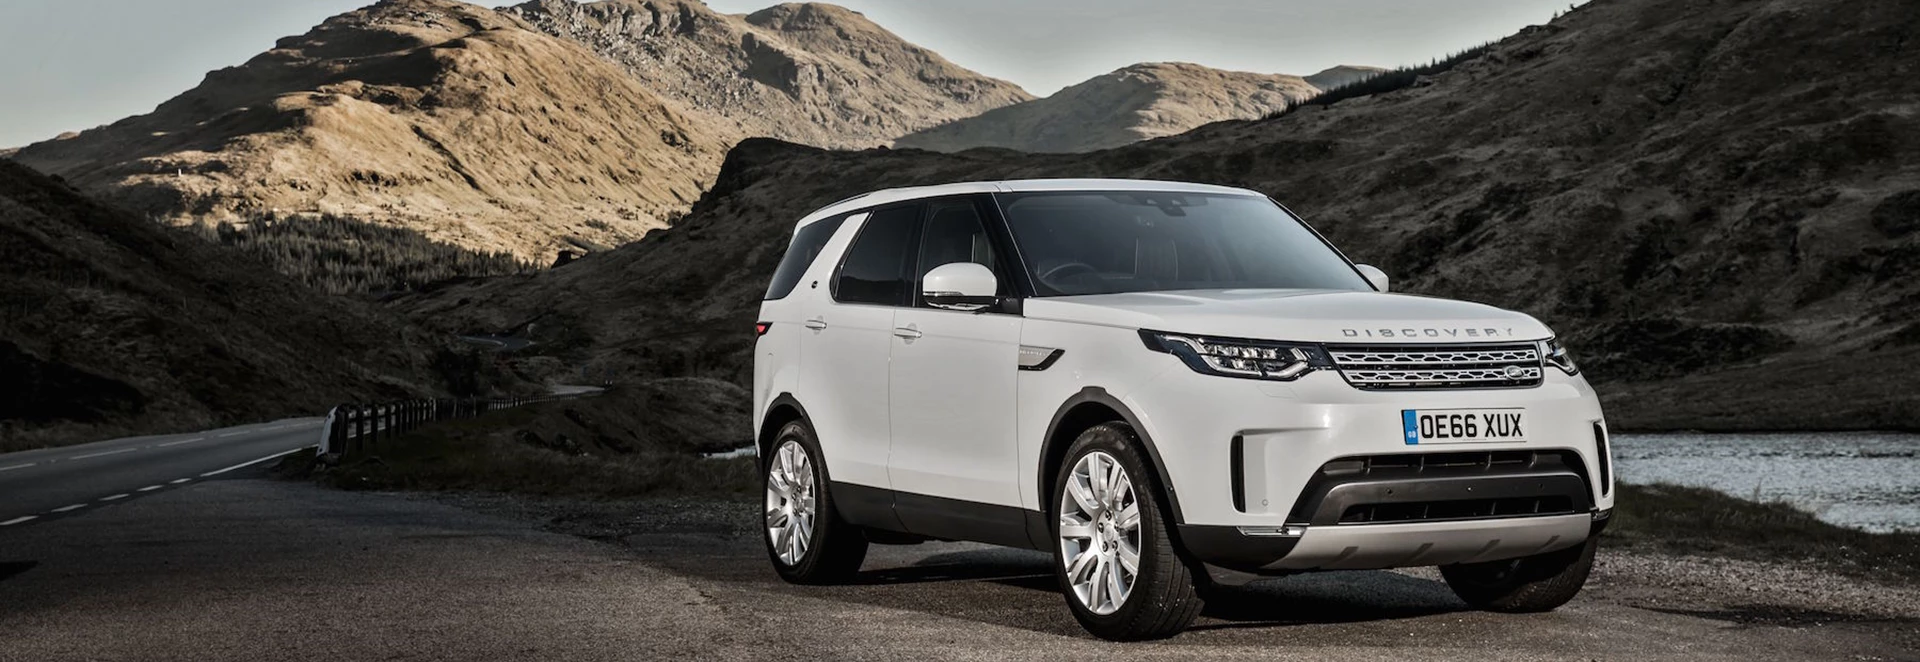 Land Rover Discovery 2019 review 